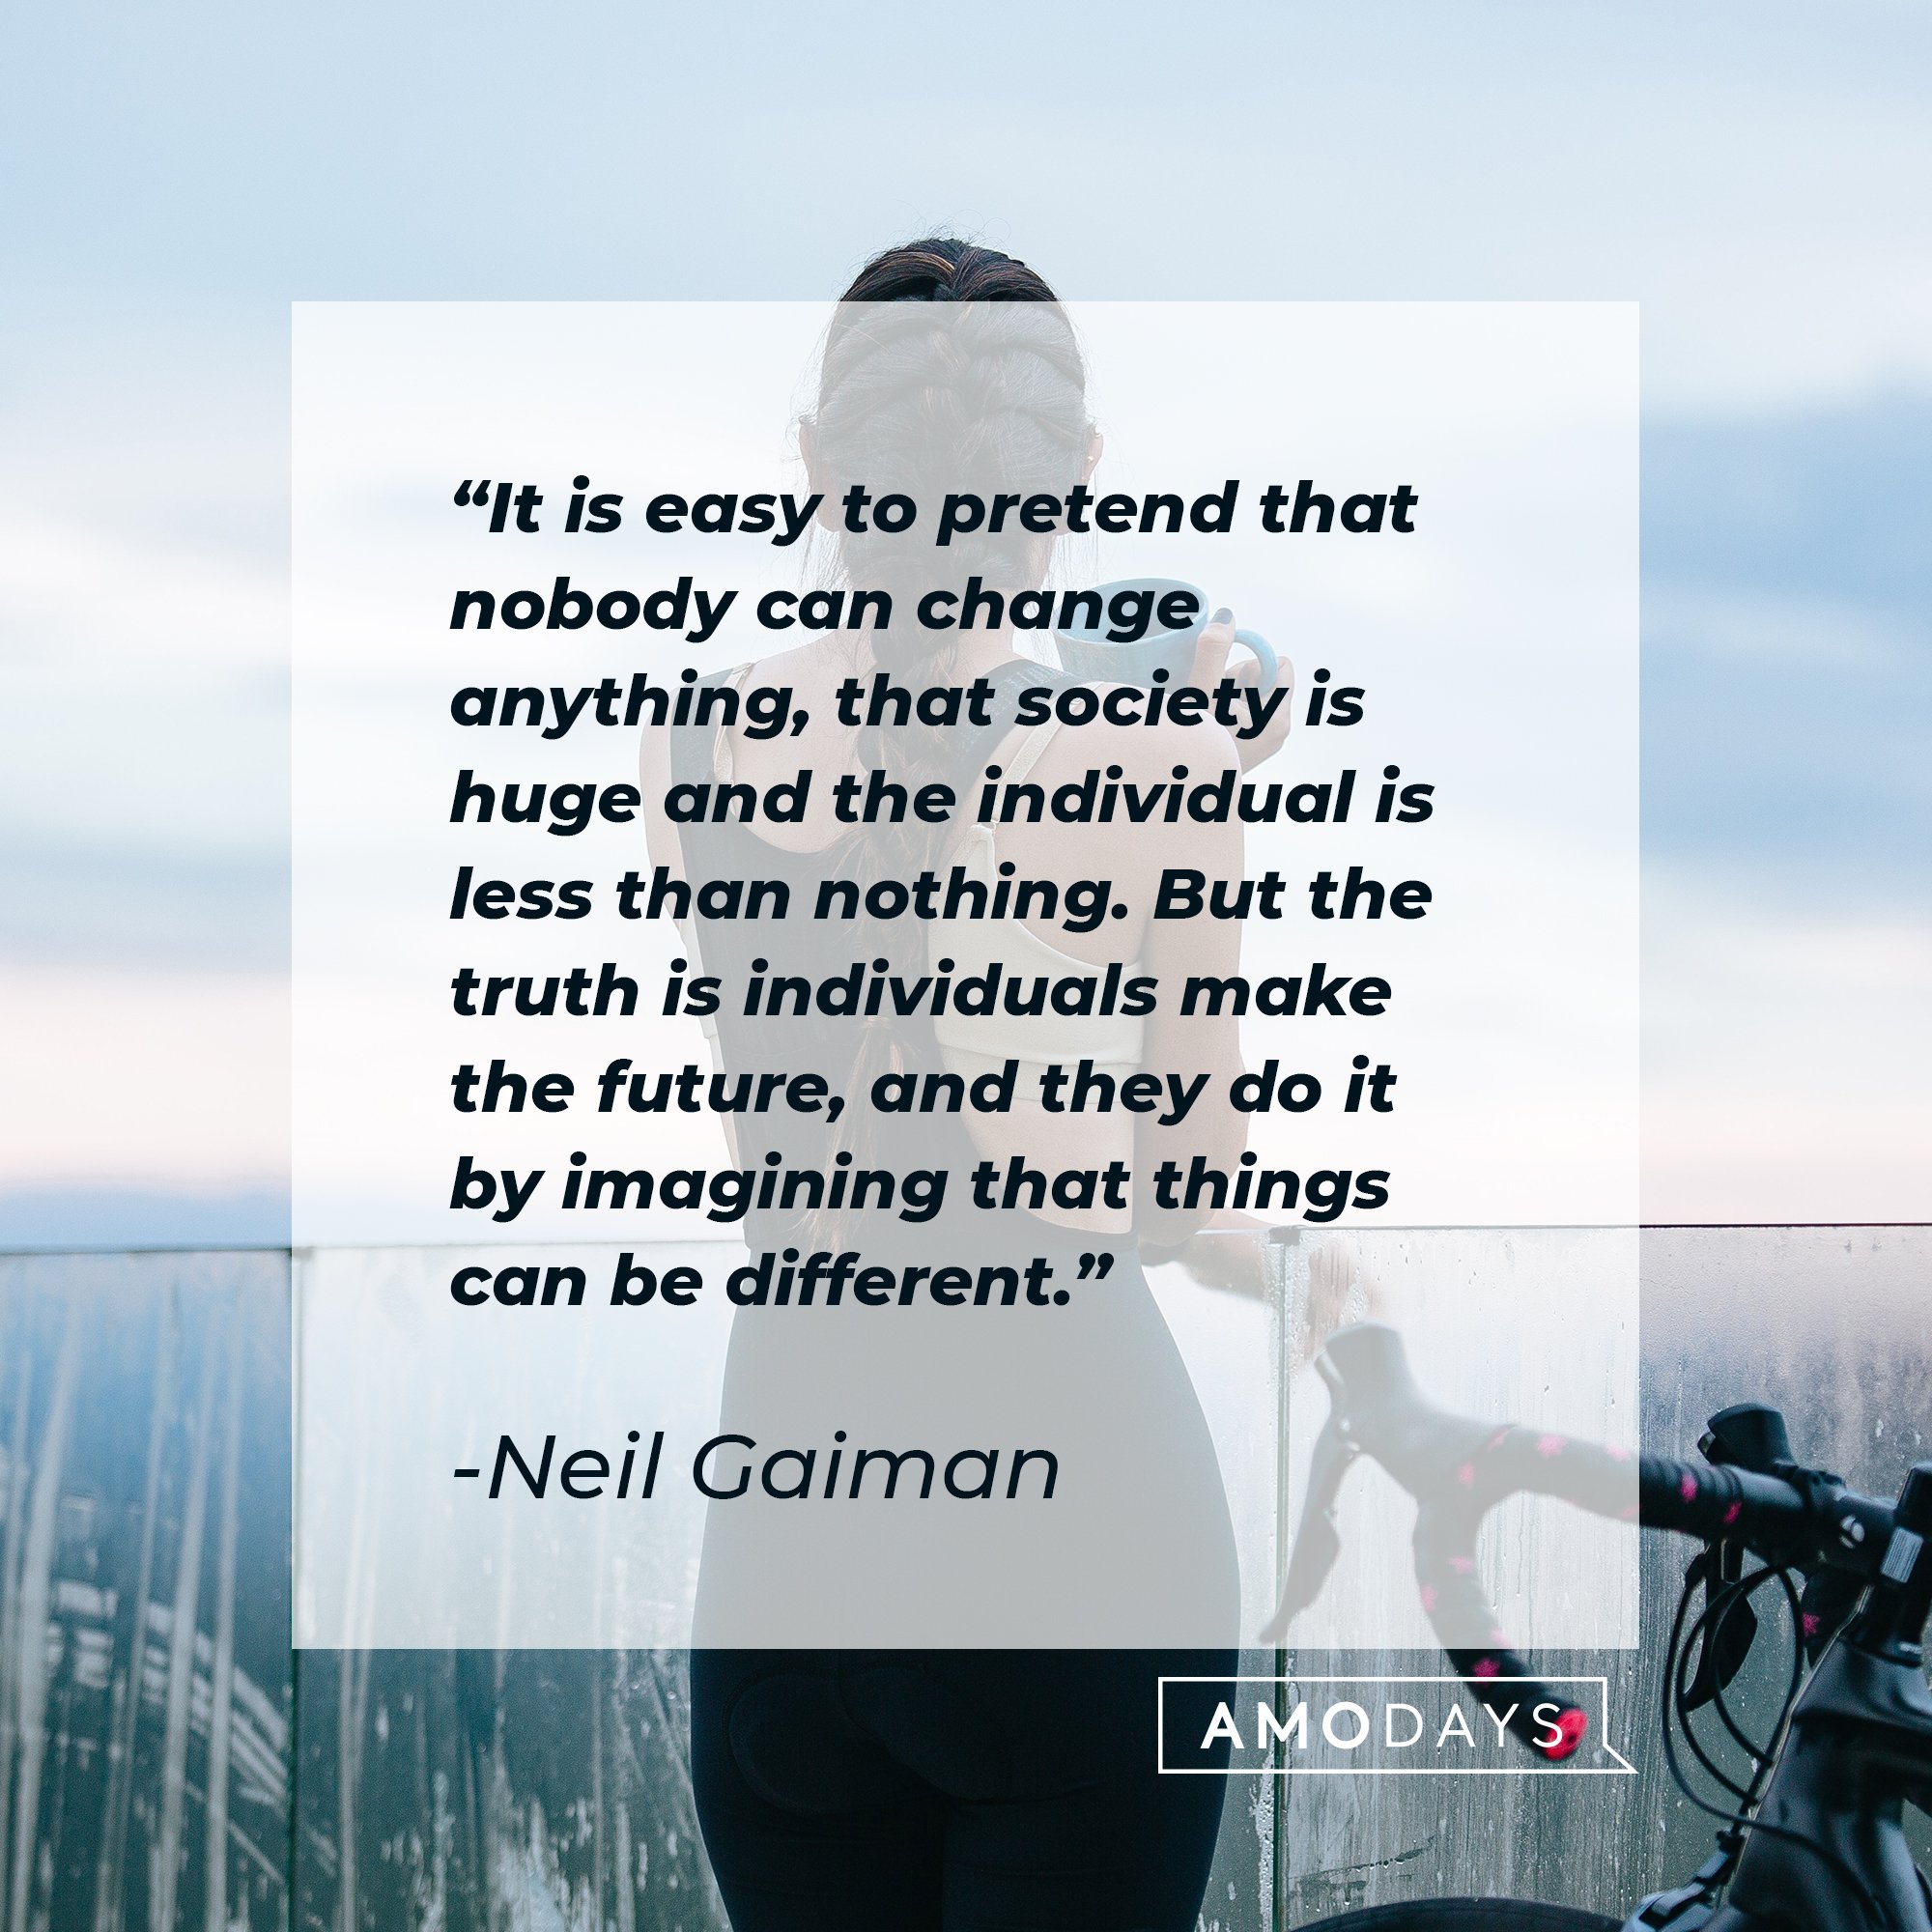  Neil Gaiman's quote: "It is easy to pretend that nobody can change anything, that society is huge and the individual is less than nothing. But the truth is individuals make the future, and they do it by imagining that things can be different." | Image: AmoDays